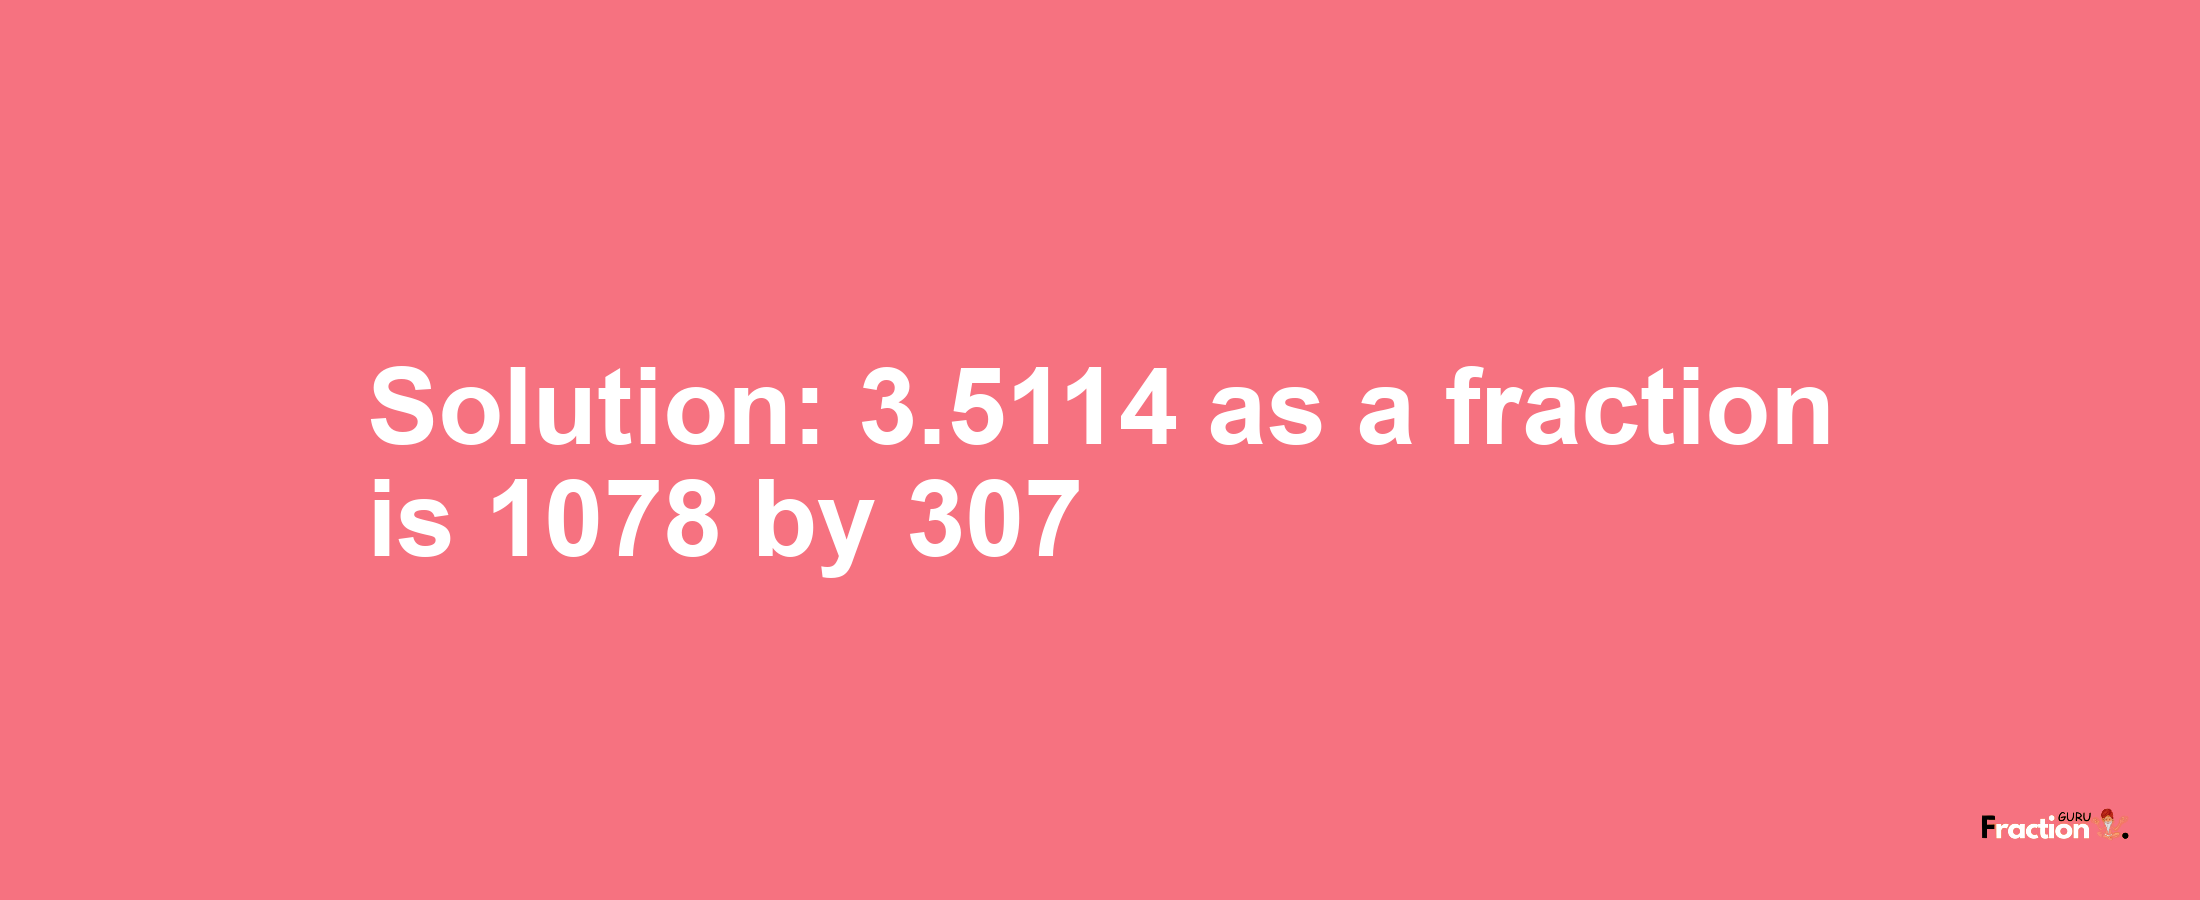 Solution:3.5114 as a fraction is 1078/307